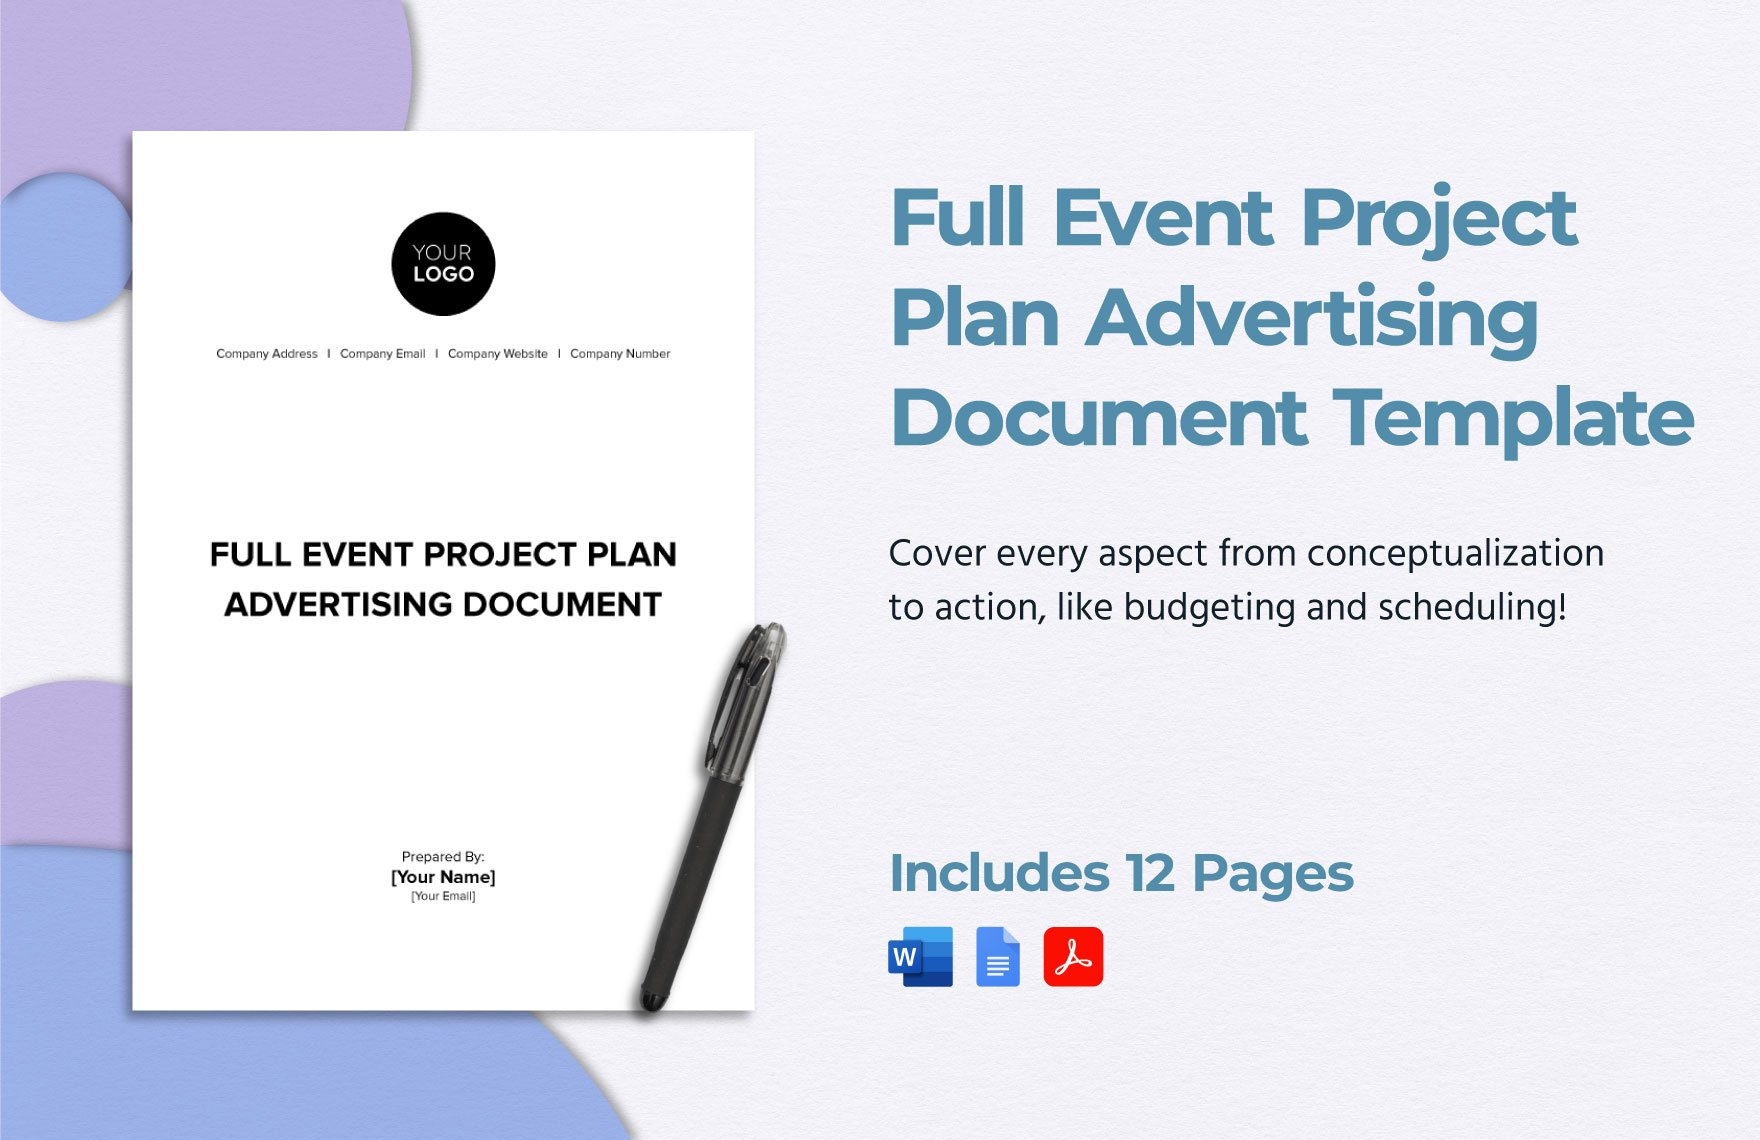 Full Event Project Plan Advertising Document Template in Word, Google Docs, PDF